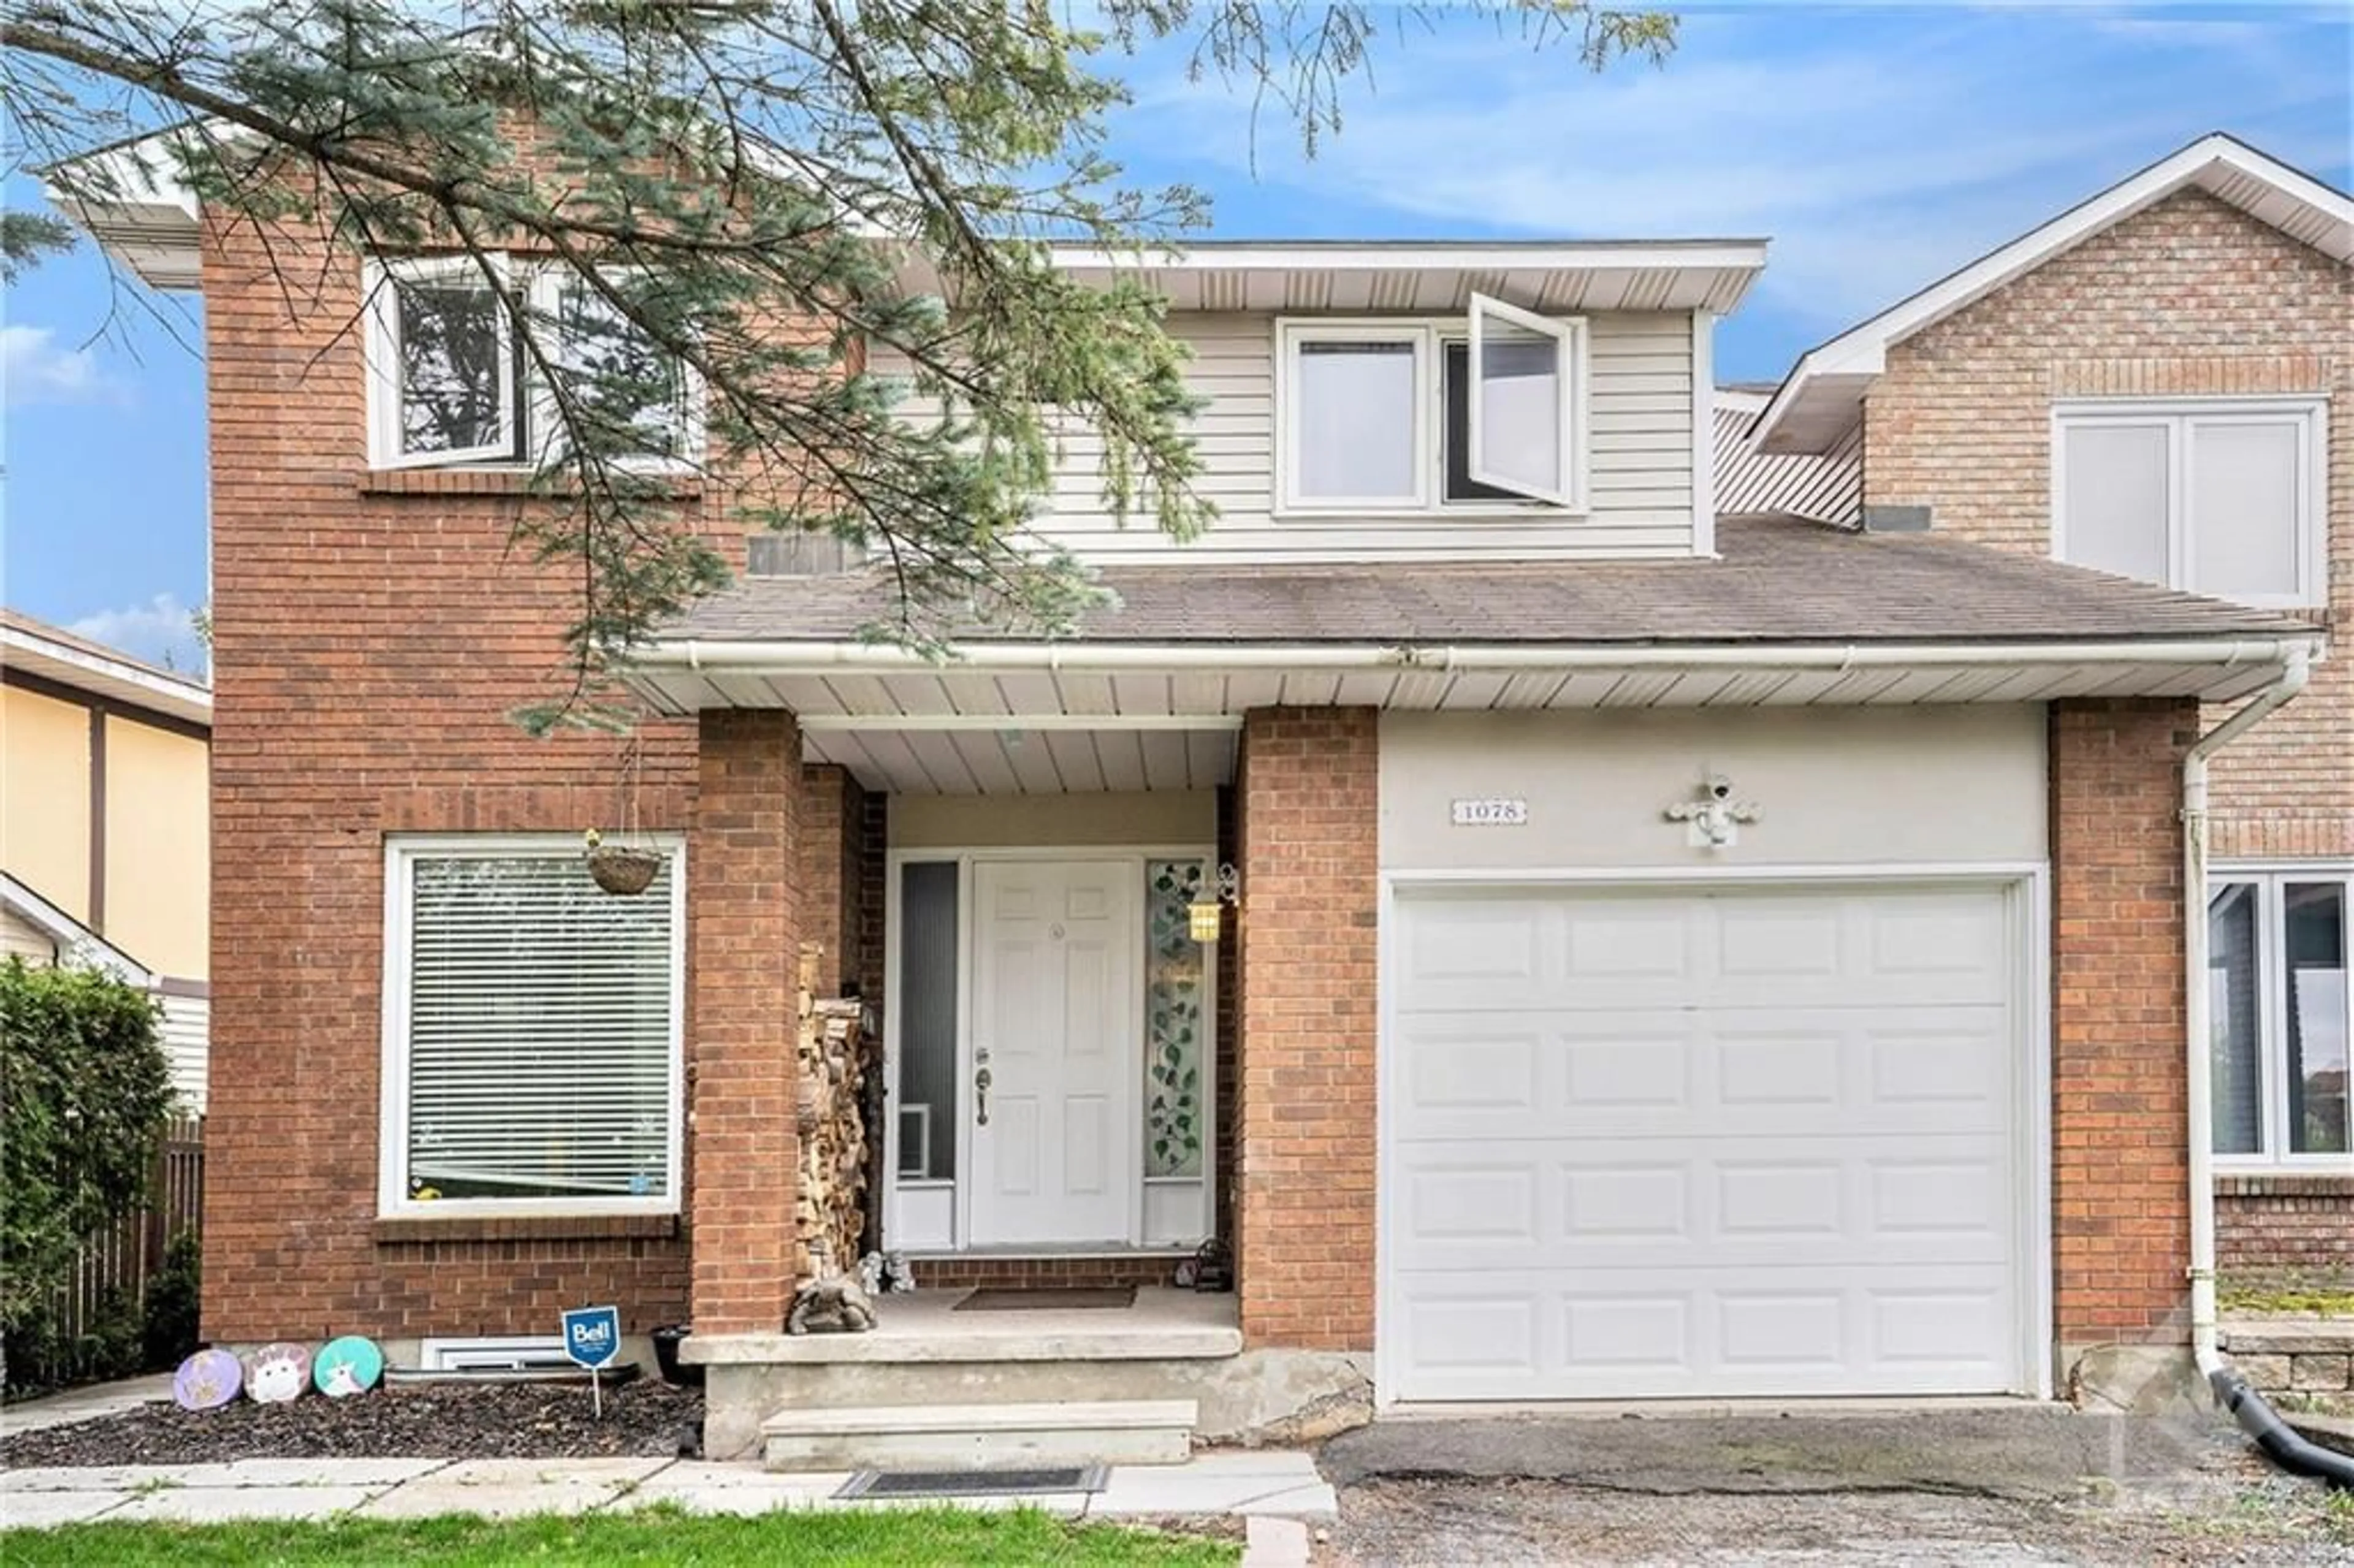 Home with brick exterior material for 1078 ST LUCIA Pl, Ottawa Ontario K1C 2G3